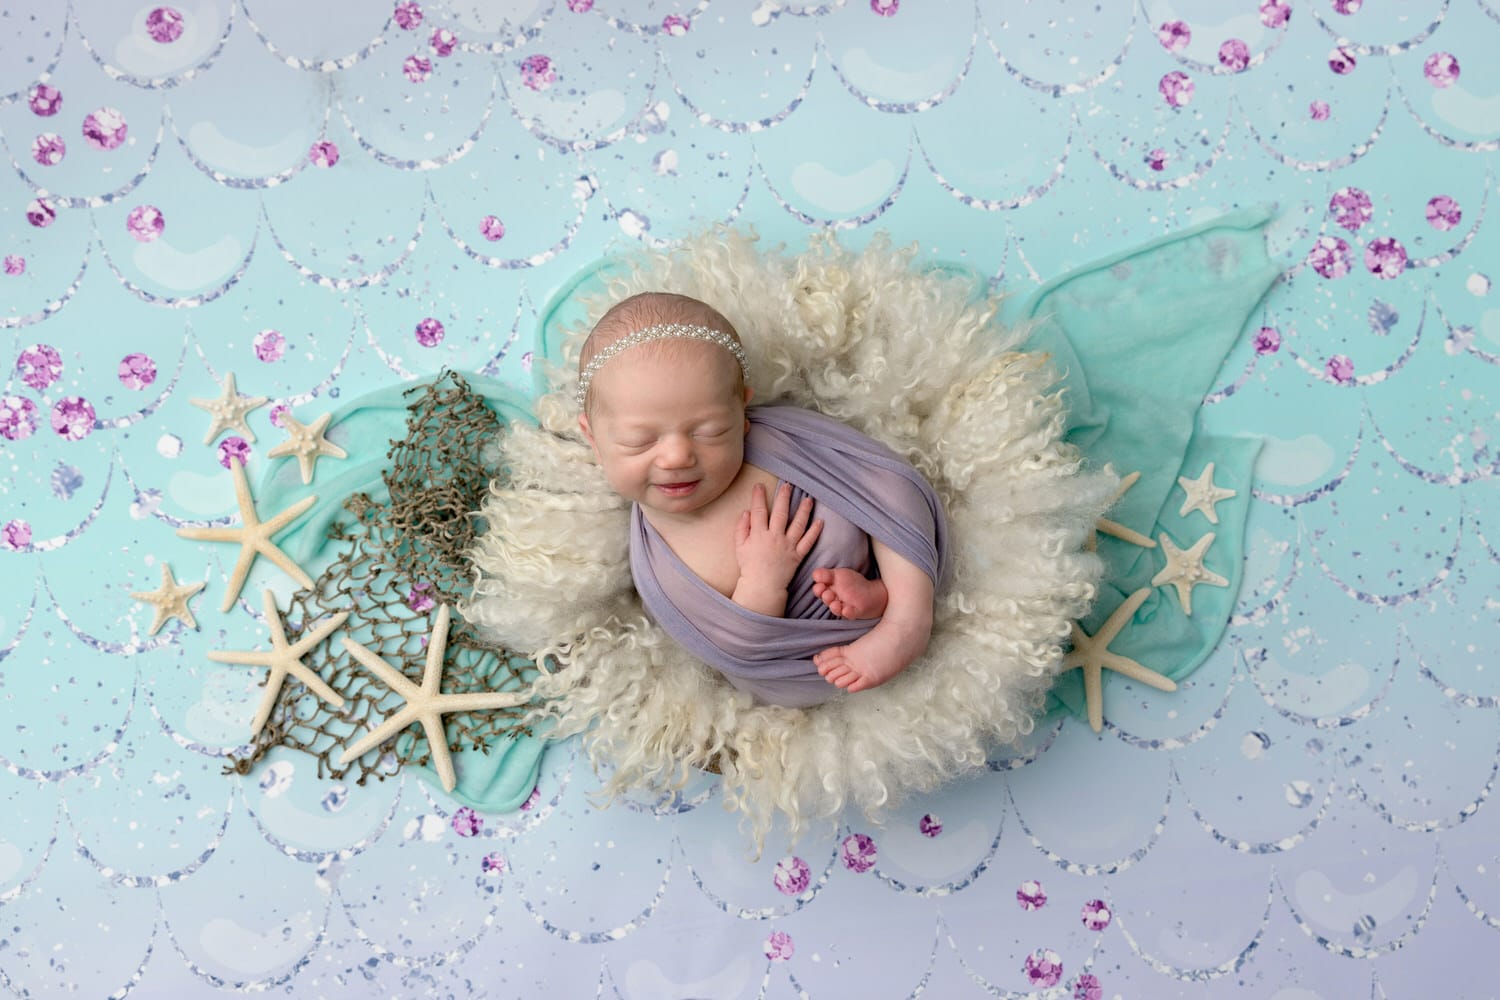 Smiling newborn portrait of a baby girl in a mermaid themed set